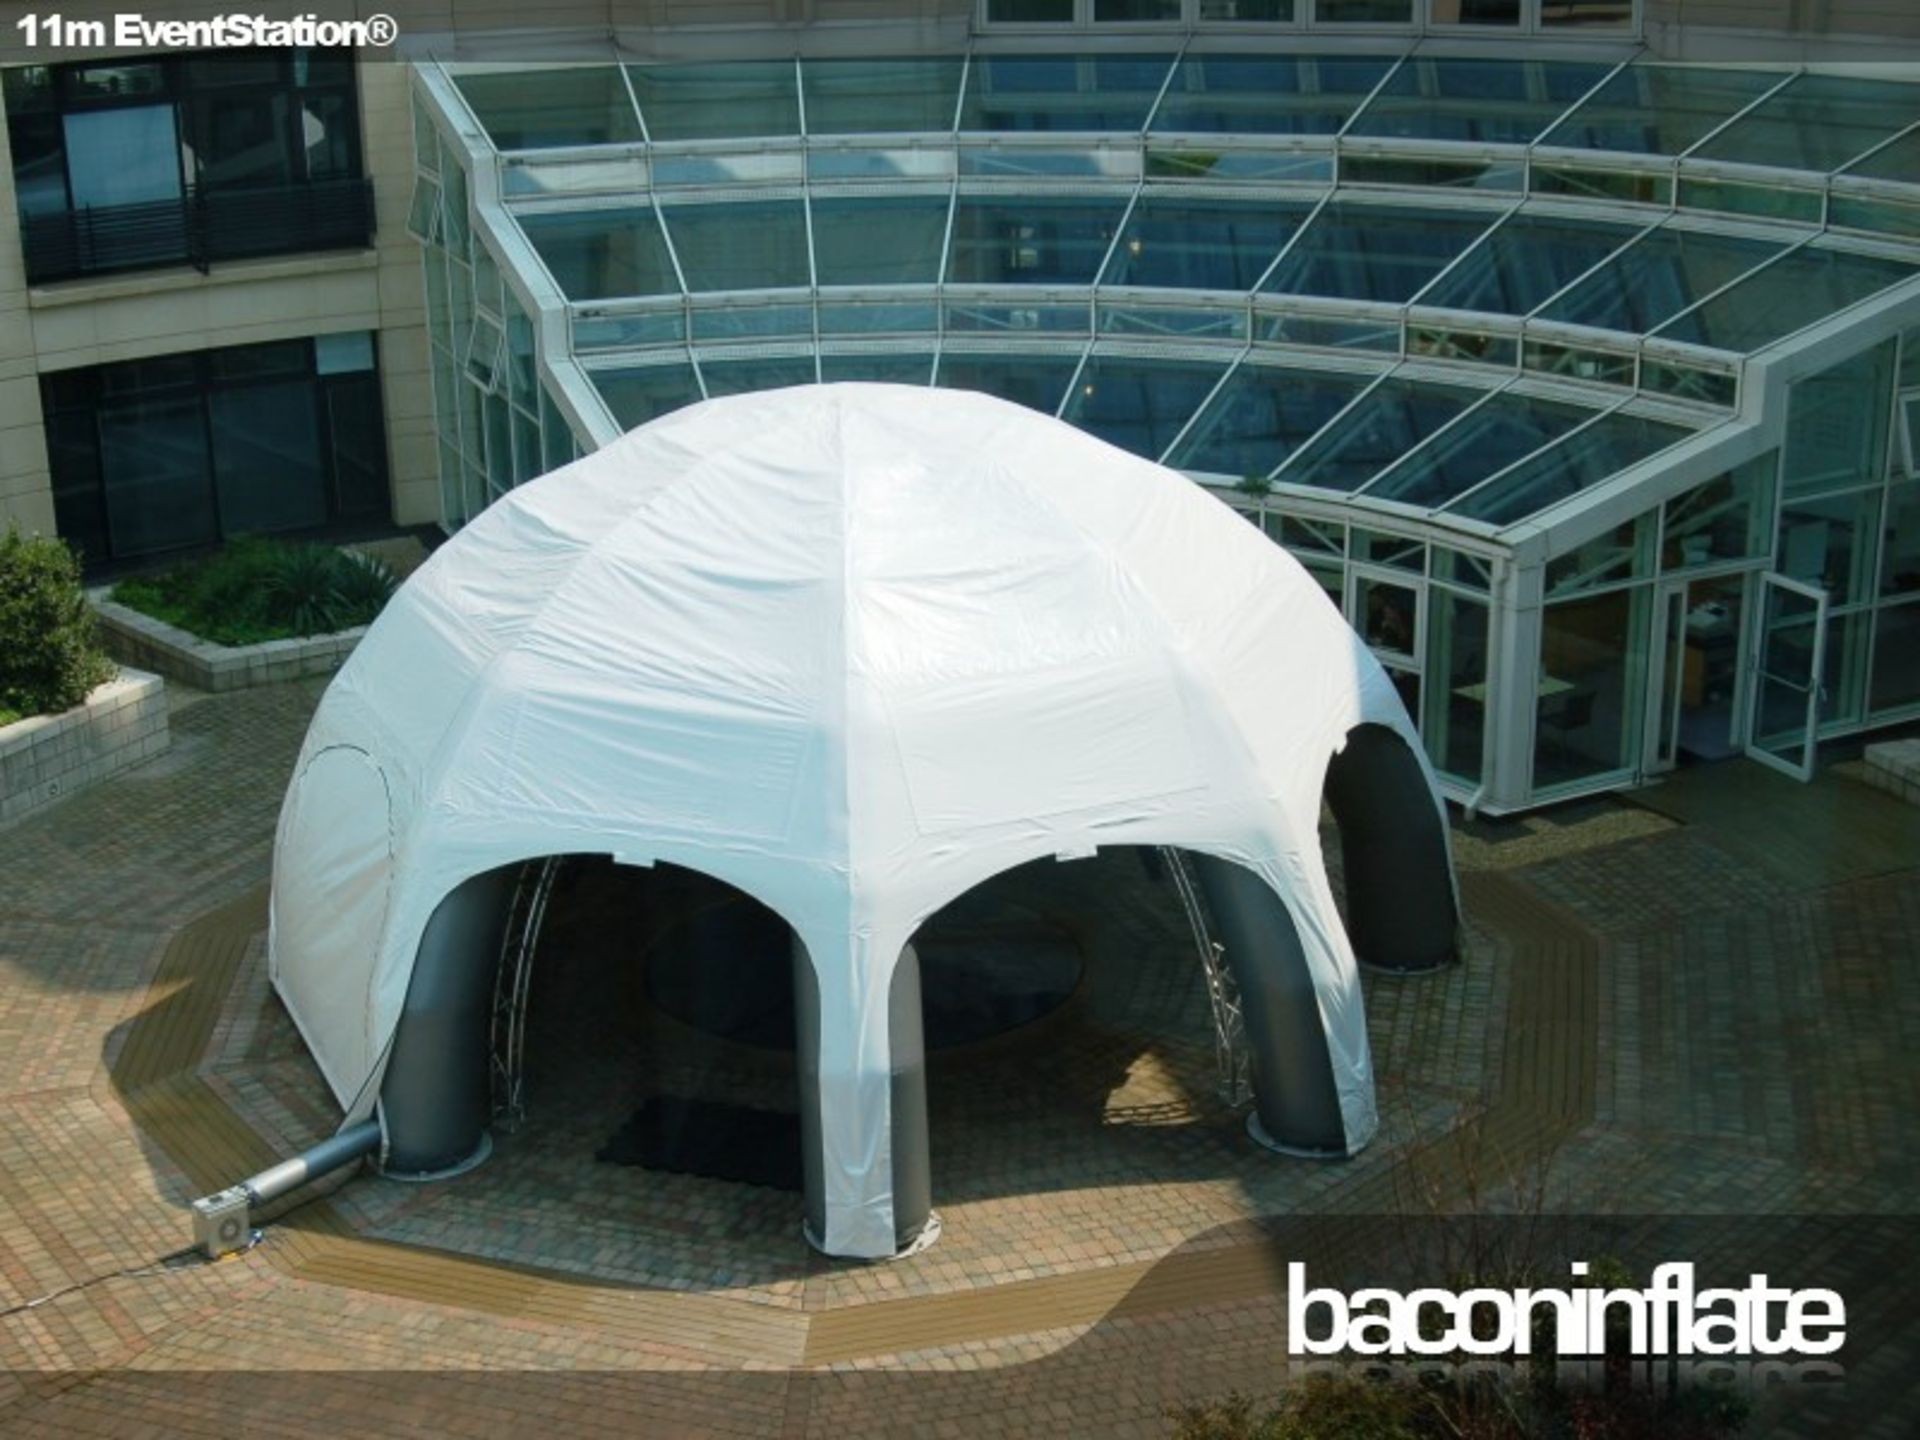 11m EventStation Leg Unit Inflatable Structure with Canopy (2 Bags) - CL573 - Location: Leicester - Image 3 of 4